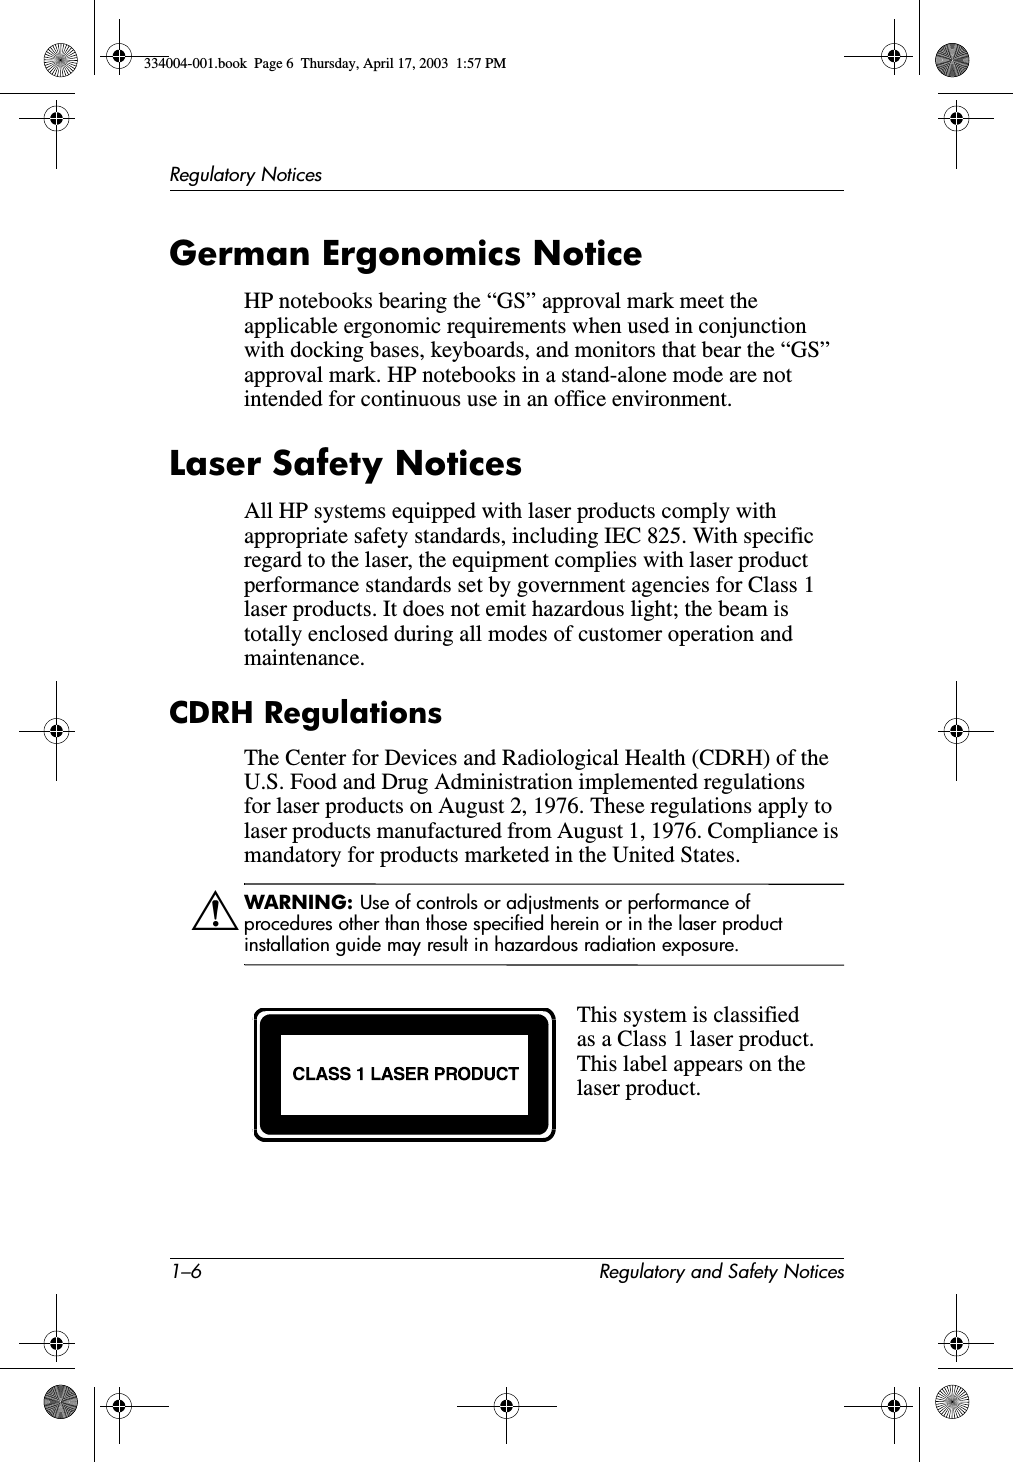 1–6 Regulatory and Safety NoticesRegulatory NoticesGerman Ergonomics NoticeHP notebooks bearing the “GS” approval mark meet the applicable ergonomic requirements when used in conjunction with docking bases, keyboards, and monitors that bear the “GS” approval mark. HP notebooks in a stand-alone mode are not intended for continuous use in an office environment.Laser Safety NoticesAll HP systems equipped with laser products comply with appropriate safety standards, including IEC 825. With specific regard to the laser, the equipment complies with laser product performance standards set by government agencies for Class 1 laser products. It does not emit hazardous light; the beam is totally enclosed during all modes of customer operation and maintenance.CDRH RegulationsThe Center for Devices and Radiological Health (CDRH) of the U.S. Food and Drug Administration implemented regulations for laser products on August 2, 1976. These regulations apply to laser products manufactured from August 1, 1976. Compliance is mandatory for products marketed in the United States.ÅWARNING: Use of controls or adjustments or performance of procedures other than those specified herein or in the laser product installation guide may result in hazardous radiation exposure.This system is classified as a Class 1 laser product. This label appears on the laser product.334004-001.book  Page 6  Thursday, April 17, 2003  1:57 PM